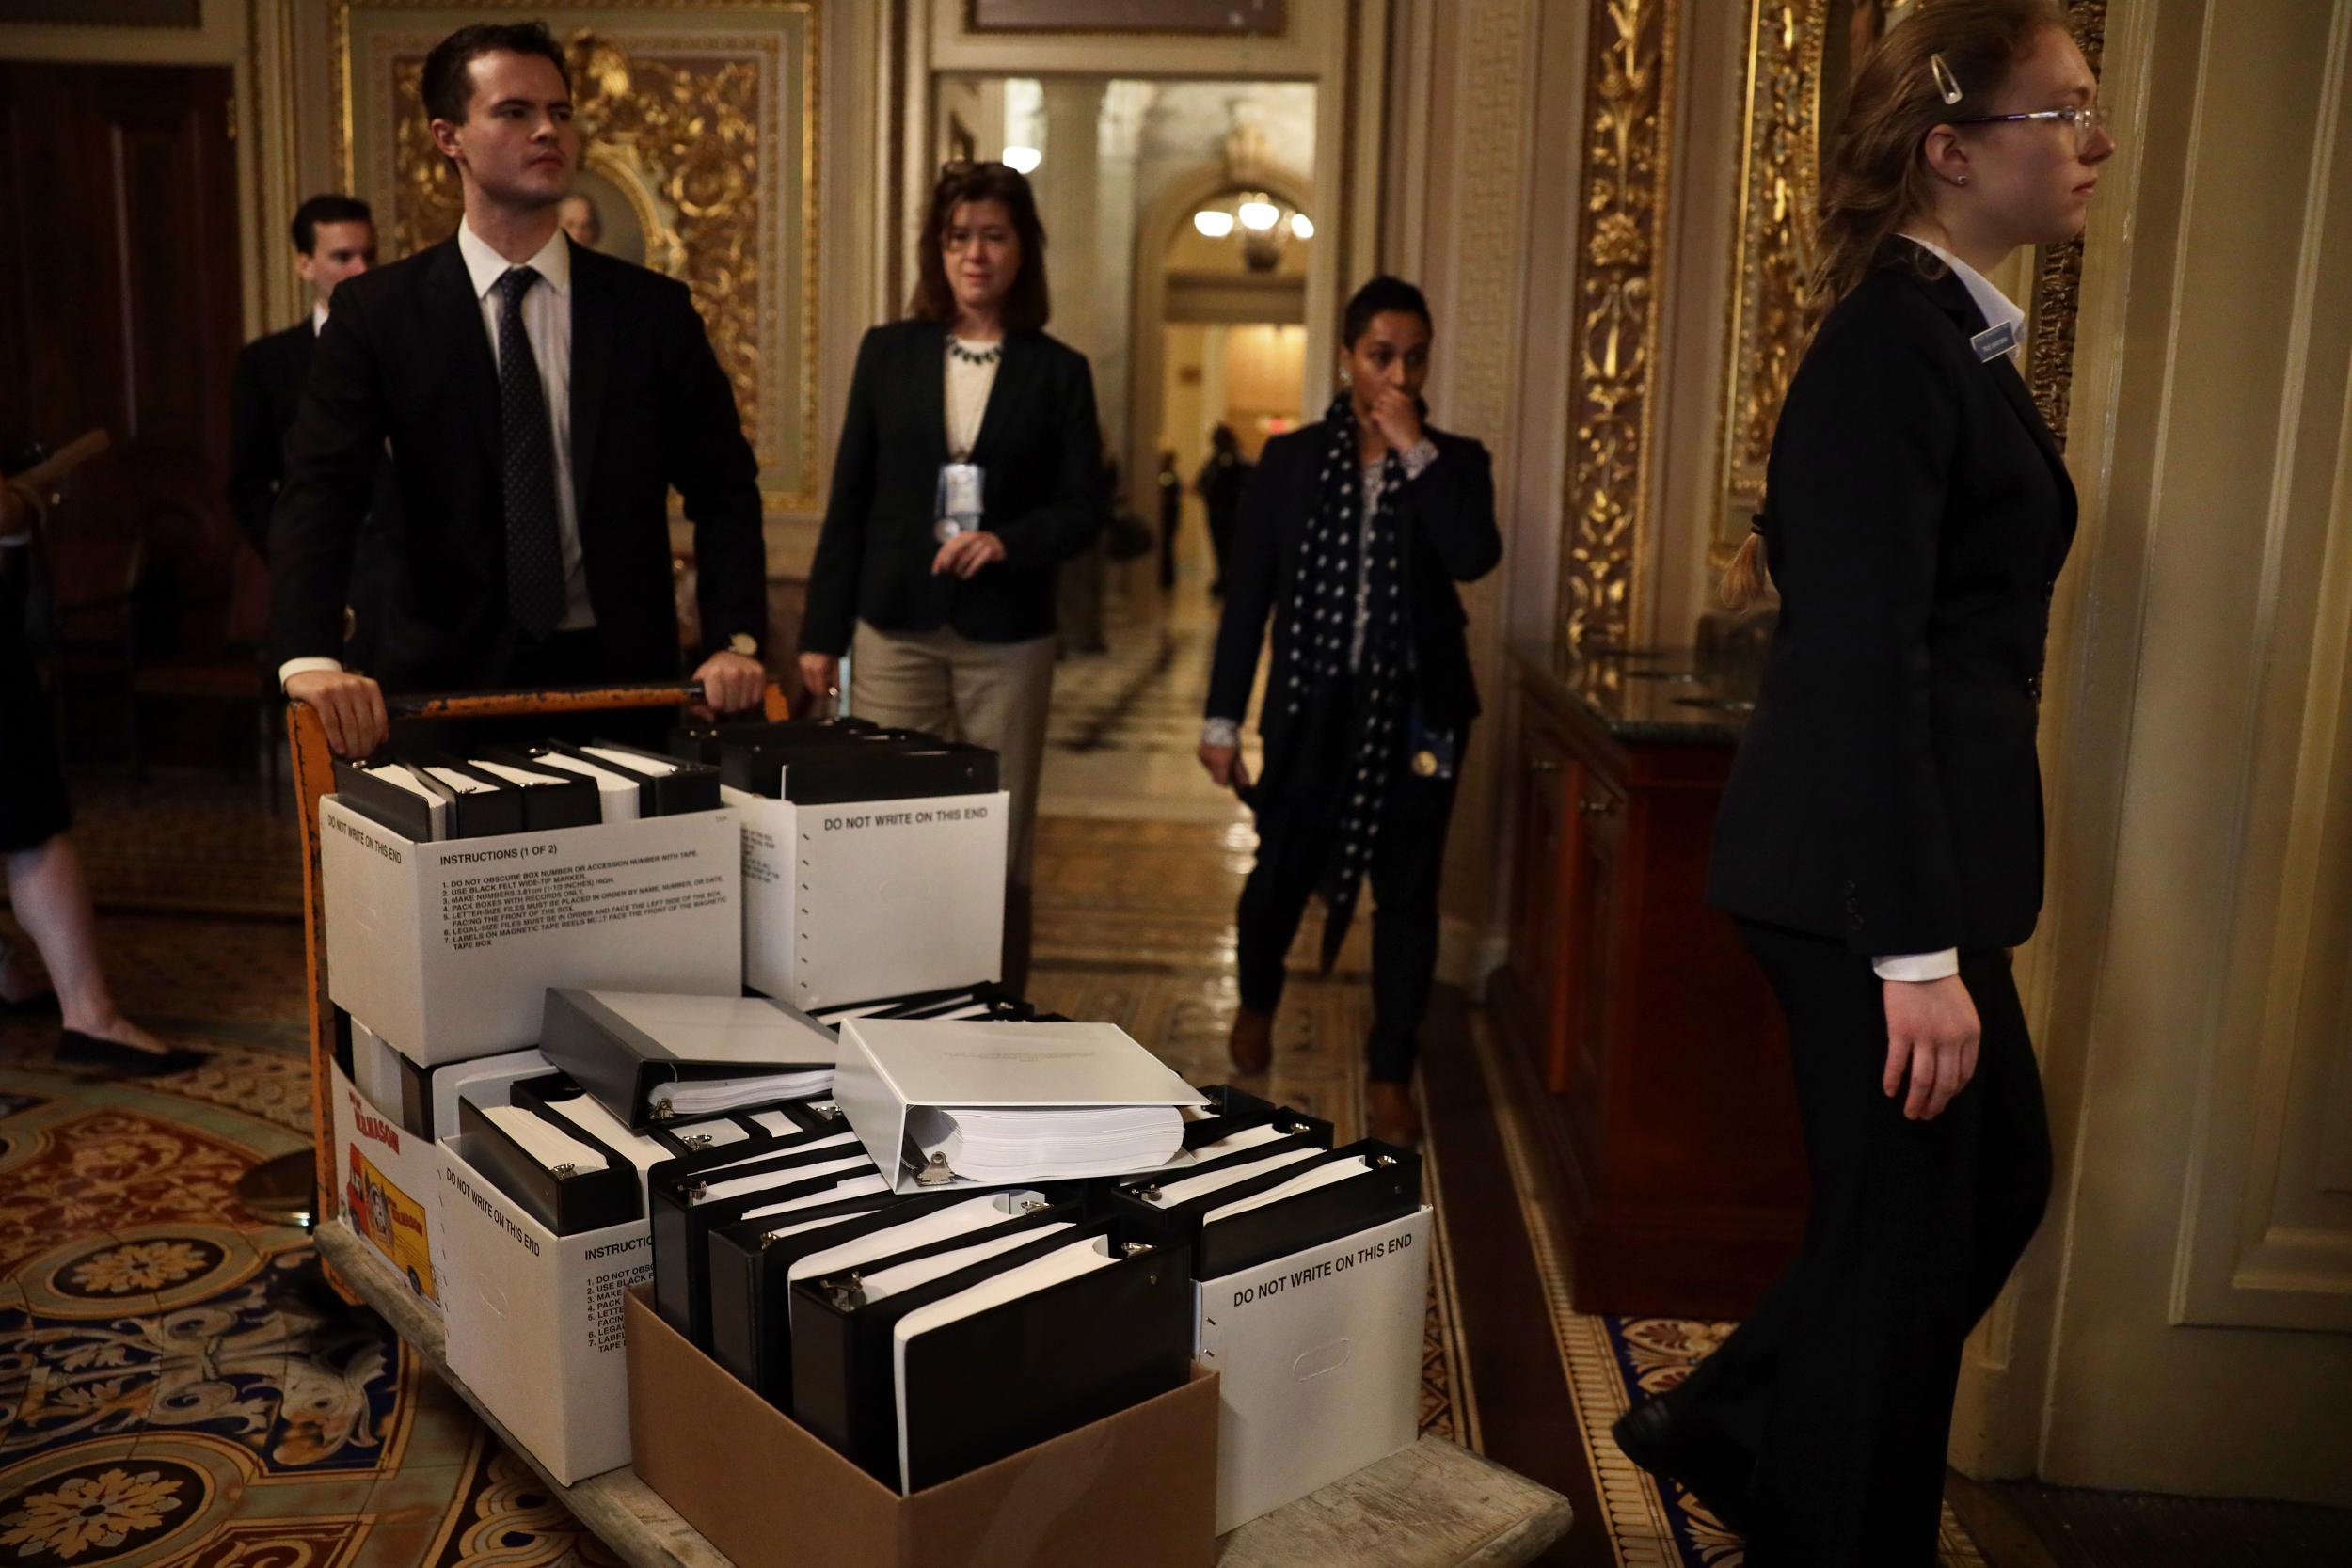 Stacks of legal papers are wheeled in ahead of the hearing